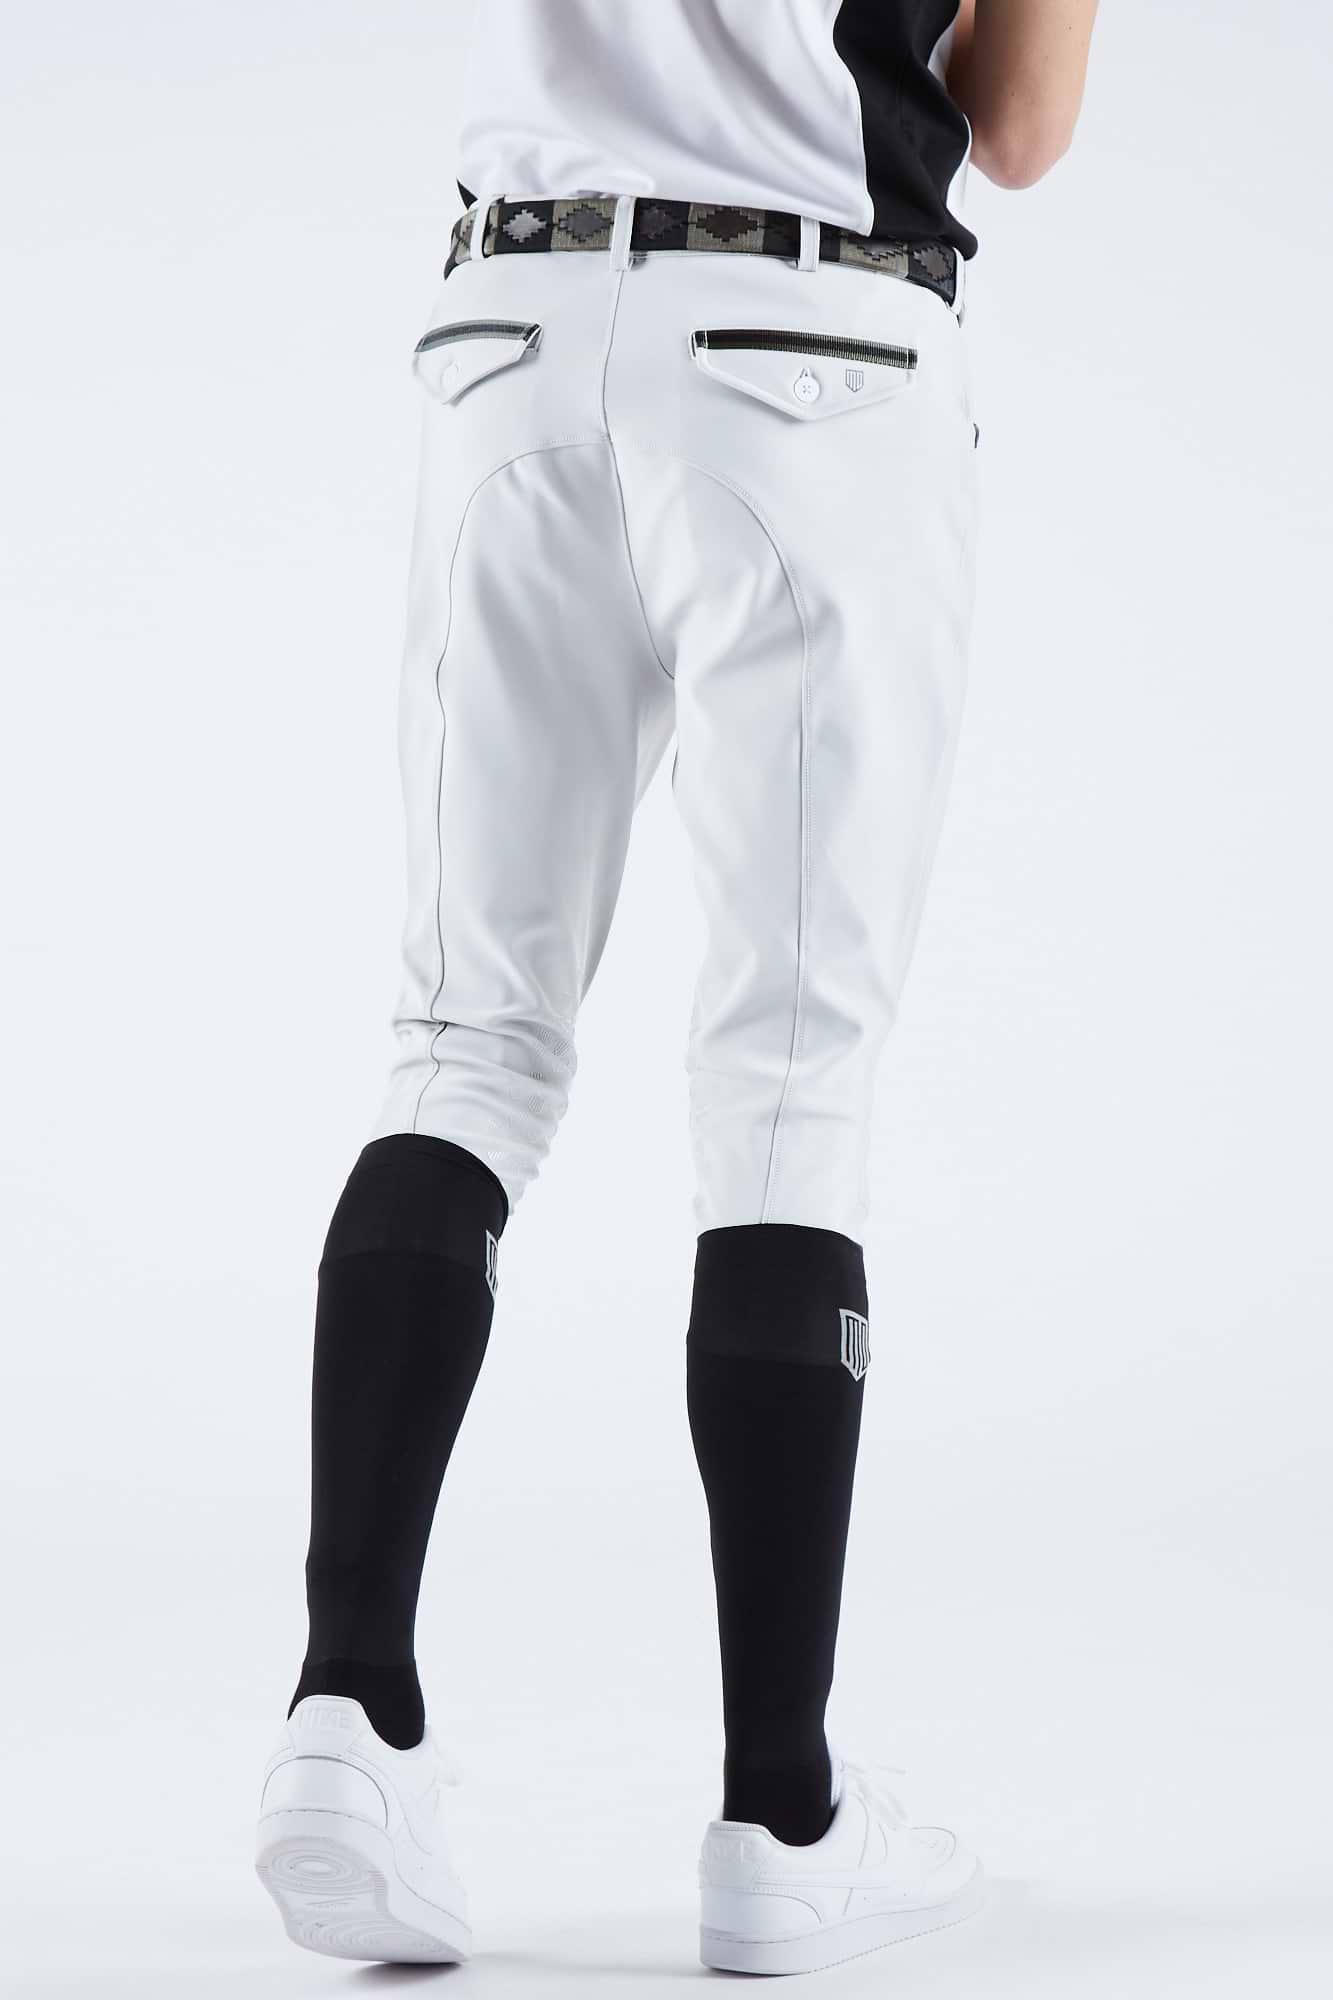 PL Frans Sport Breeches Old